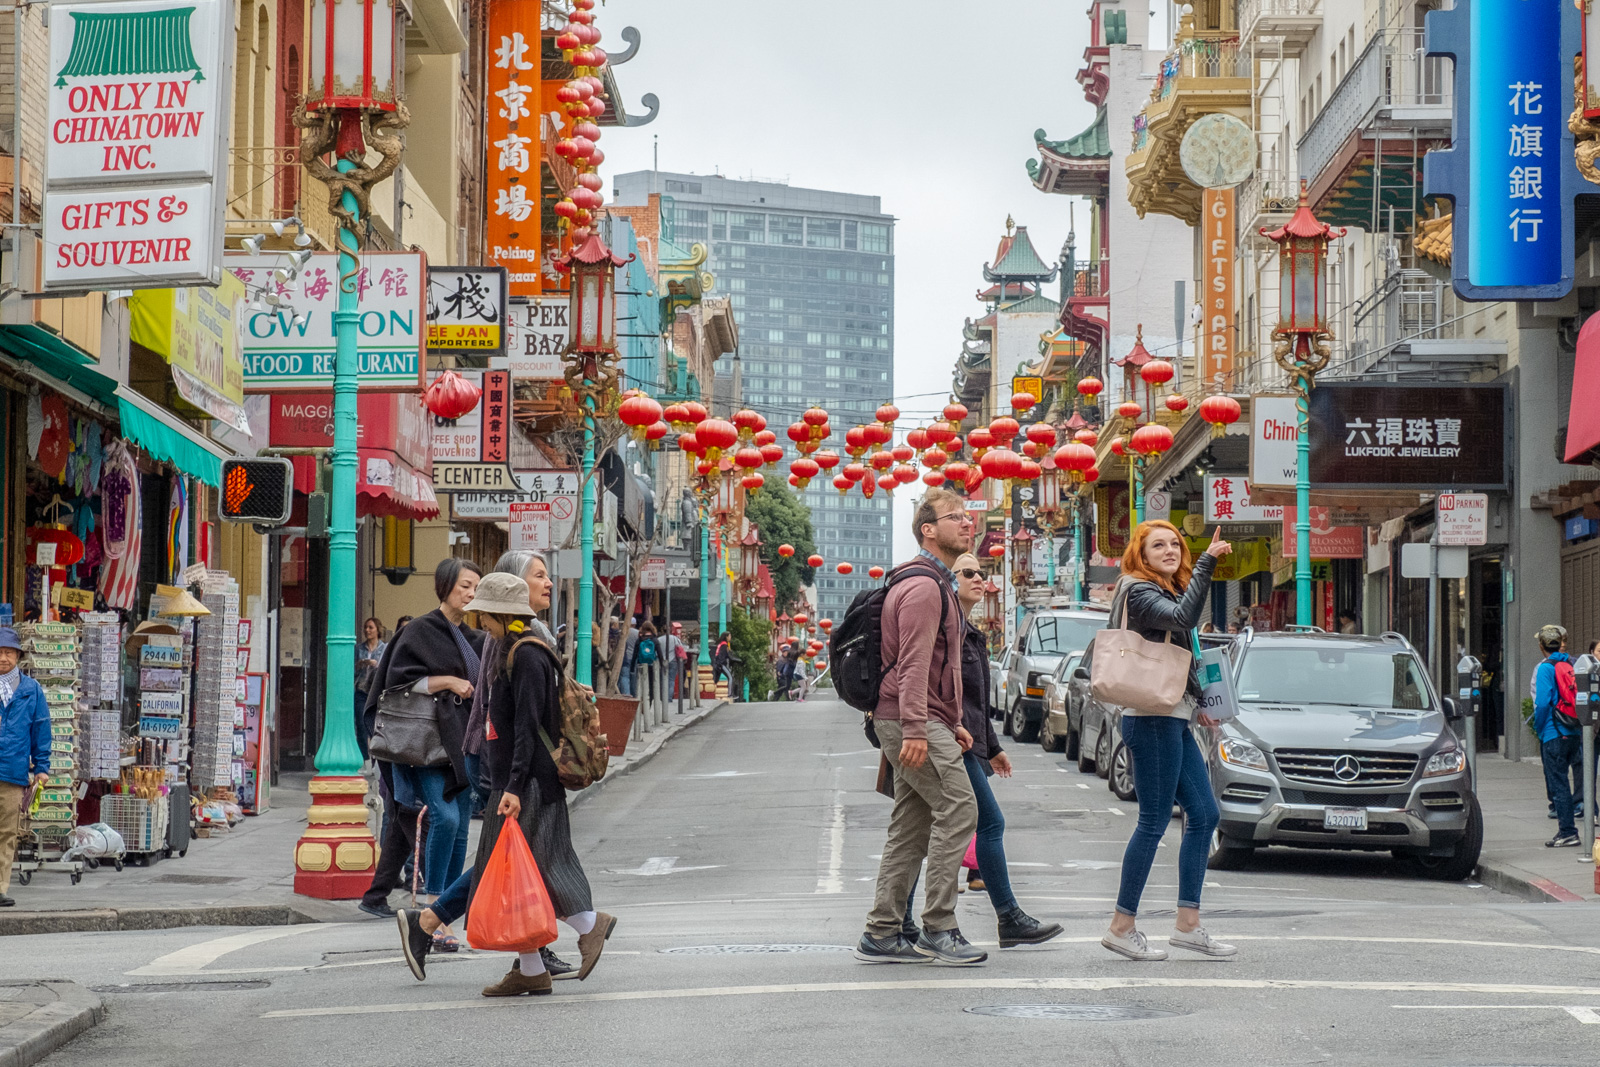 San Francisco chinatown guide crosses street while explaining to tour guests what they are seeing